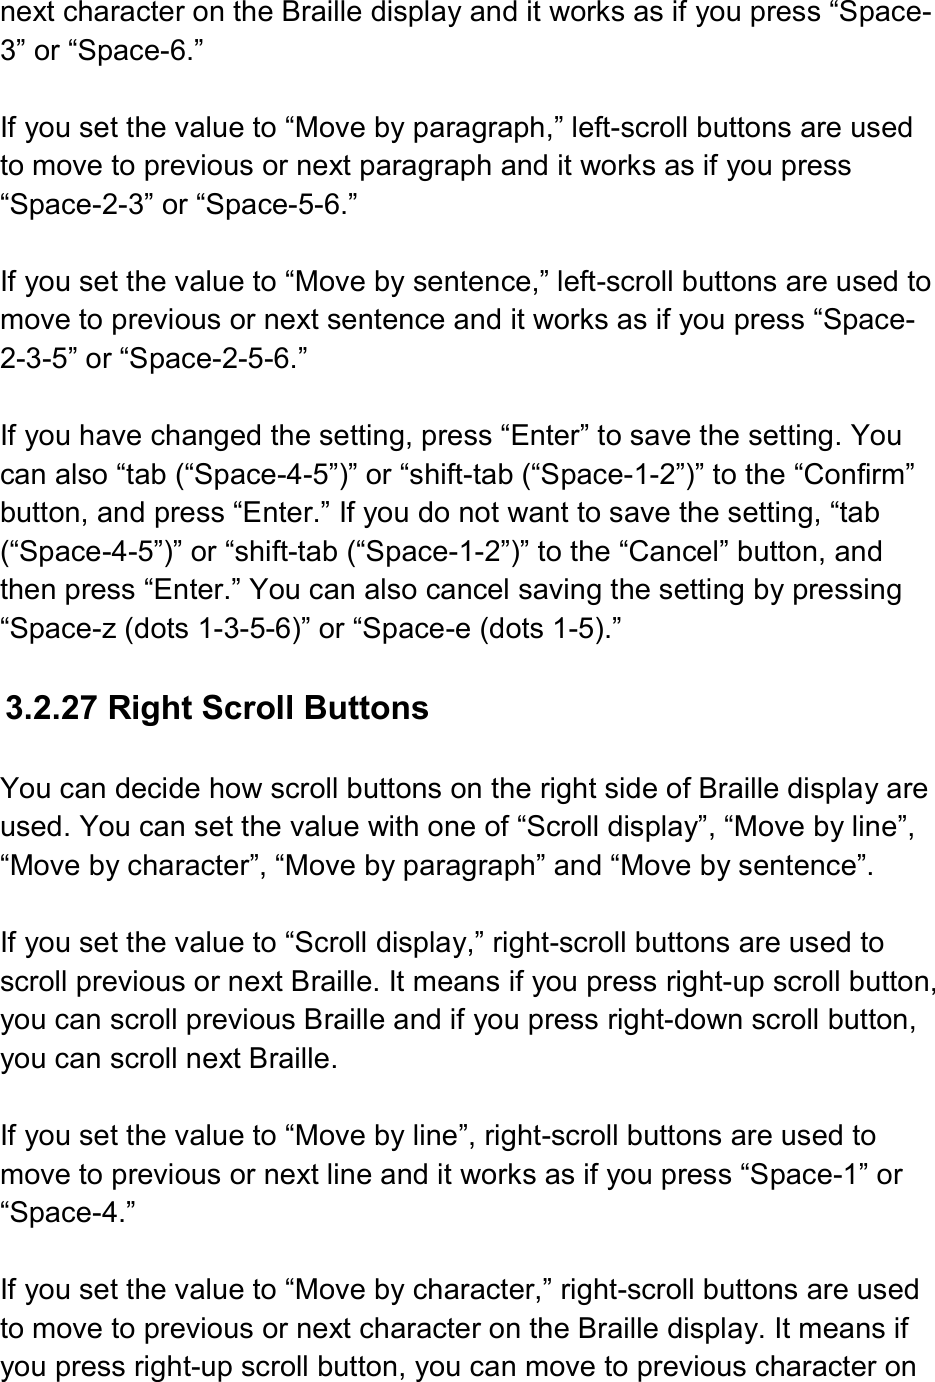  next character on the Braille display and it works as if you press “Space-3” or “Space-6.”  If you set the value to “Move by paragraph,” left-scroll buttons are used to move to previous or next paragraph and it works as if you press “Space-2-3” or “Space-5-6.”    If you set the value to “Move by sentence,” left-scroll buttons are used to move to previous or next sentence and it works as if you press “Space-2-3-5” or “Space-2-5-6.”  If you have changed the setting, press “Enter” to save the setting. You can also “tab (“Space-4-5”)” or “shift-tab (“Space-1-2”)” to the “Confirm” button, and press “Enter.” If you do not want to save the setting, “tab (“Space-4-5”)” or “shift-tab (“Space-1-2”)” to the “Cancel” button, and then press “Enter.” You can also cancel saving the setting by pressing “Space-z (dots 1-3-5-6)” or “Space-e (dots 1-5).”  3.2.27 Right Scroll Buttons  You can decide how scroll buttons on the right side of Braille display are used. You can set the value with one of “Scroll display”, “Move by line”, “Move by character”, “Move by paragraph” and “Move by sentence”.  If you set the value to “Scroll display,” right-scroll buttons are used to scroll previous or next Braille. It means if you press right-up scroll button, you can scroll previous Braille and if you press right-down scroll button, you can scroll next Braille.  If you set the value to “Move by line”, right-scroll buttons are used to move to previous or next line and it works as if you press “Space-1” or “Space-4.”    If you set the value to “Move by character,” right-scroll buttons are used to move to previous or next character on the Braille display. It means if you press right-up scroll button, you can move to previous character on 